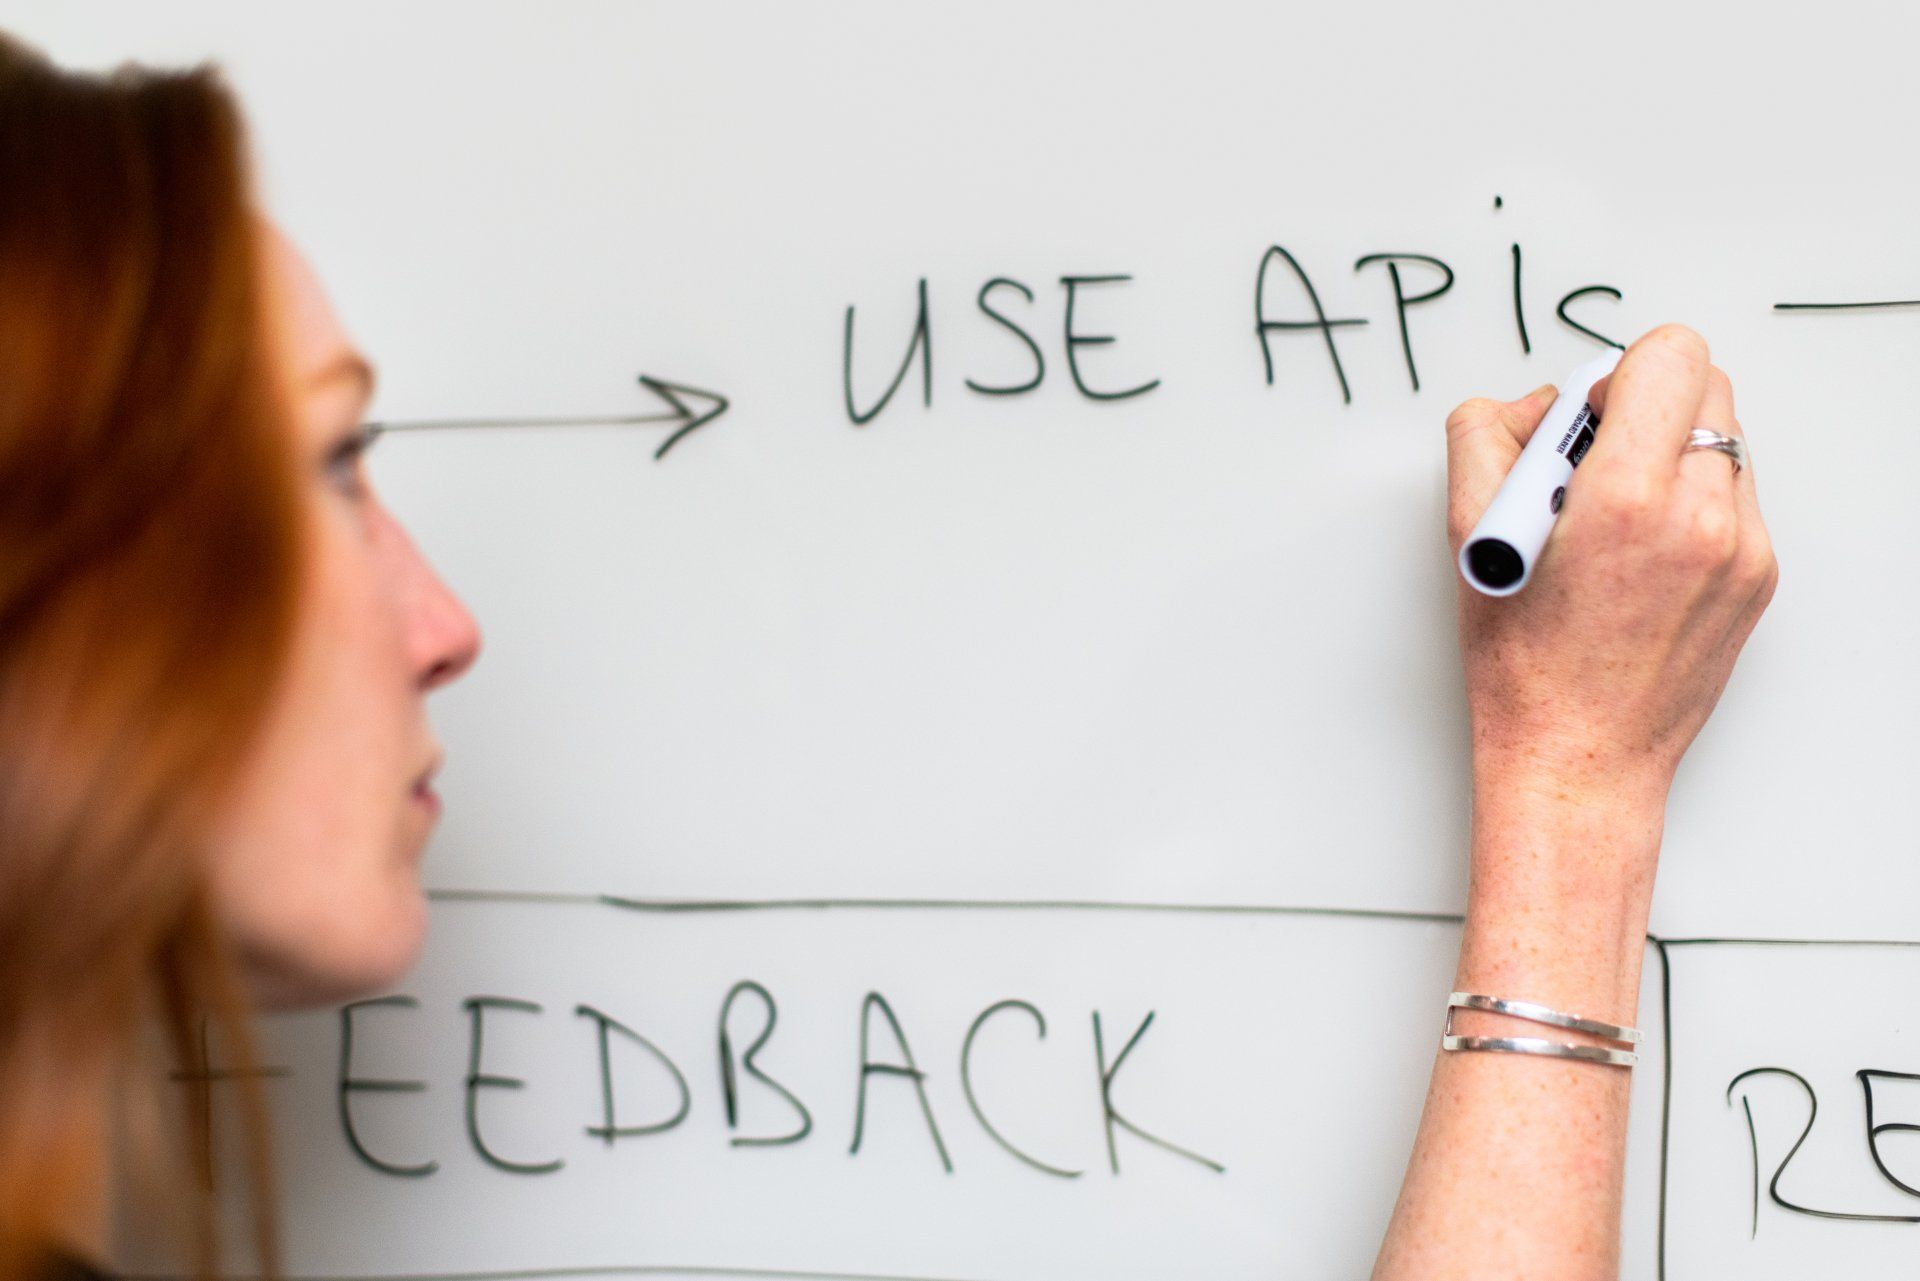 A woman is writing on a whiteboard that says use apis feedback